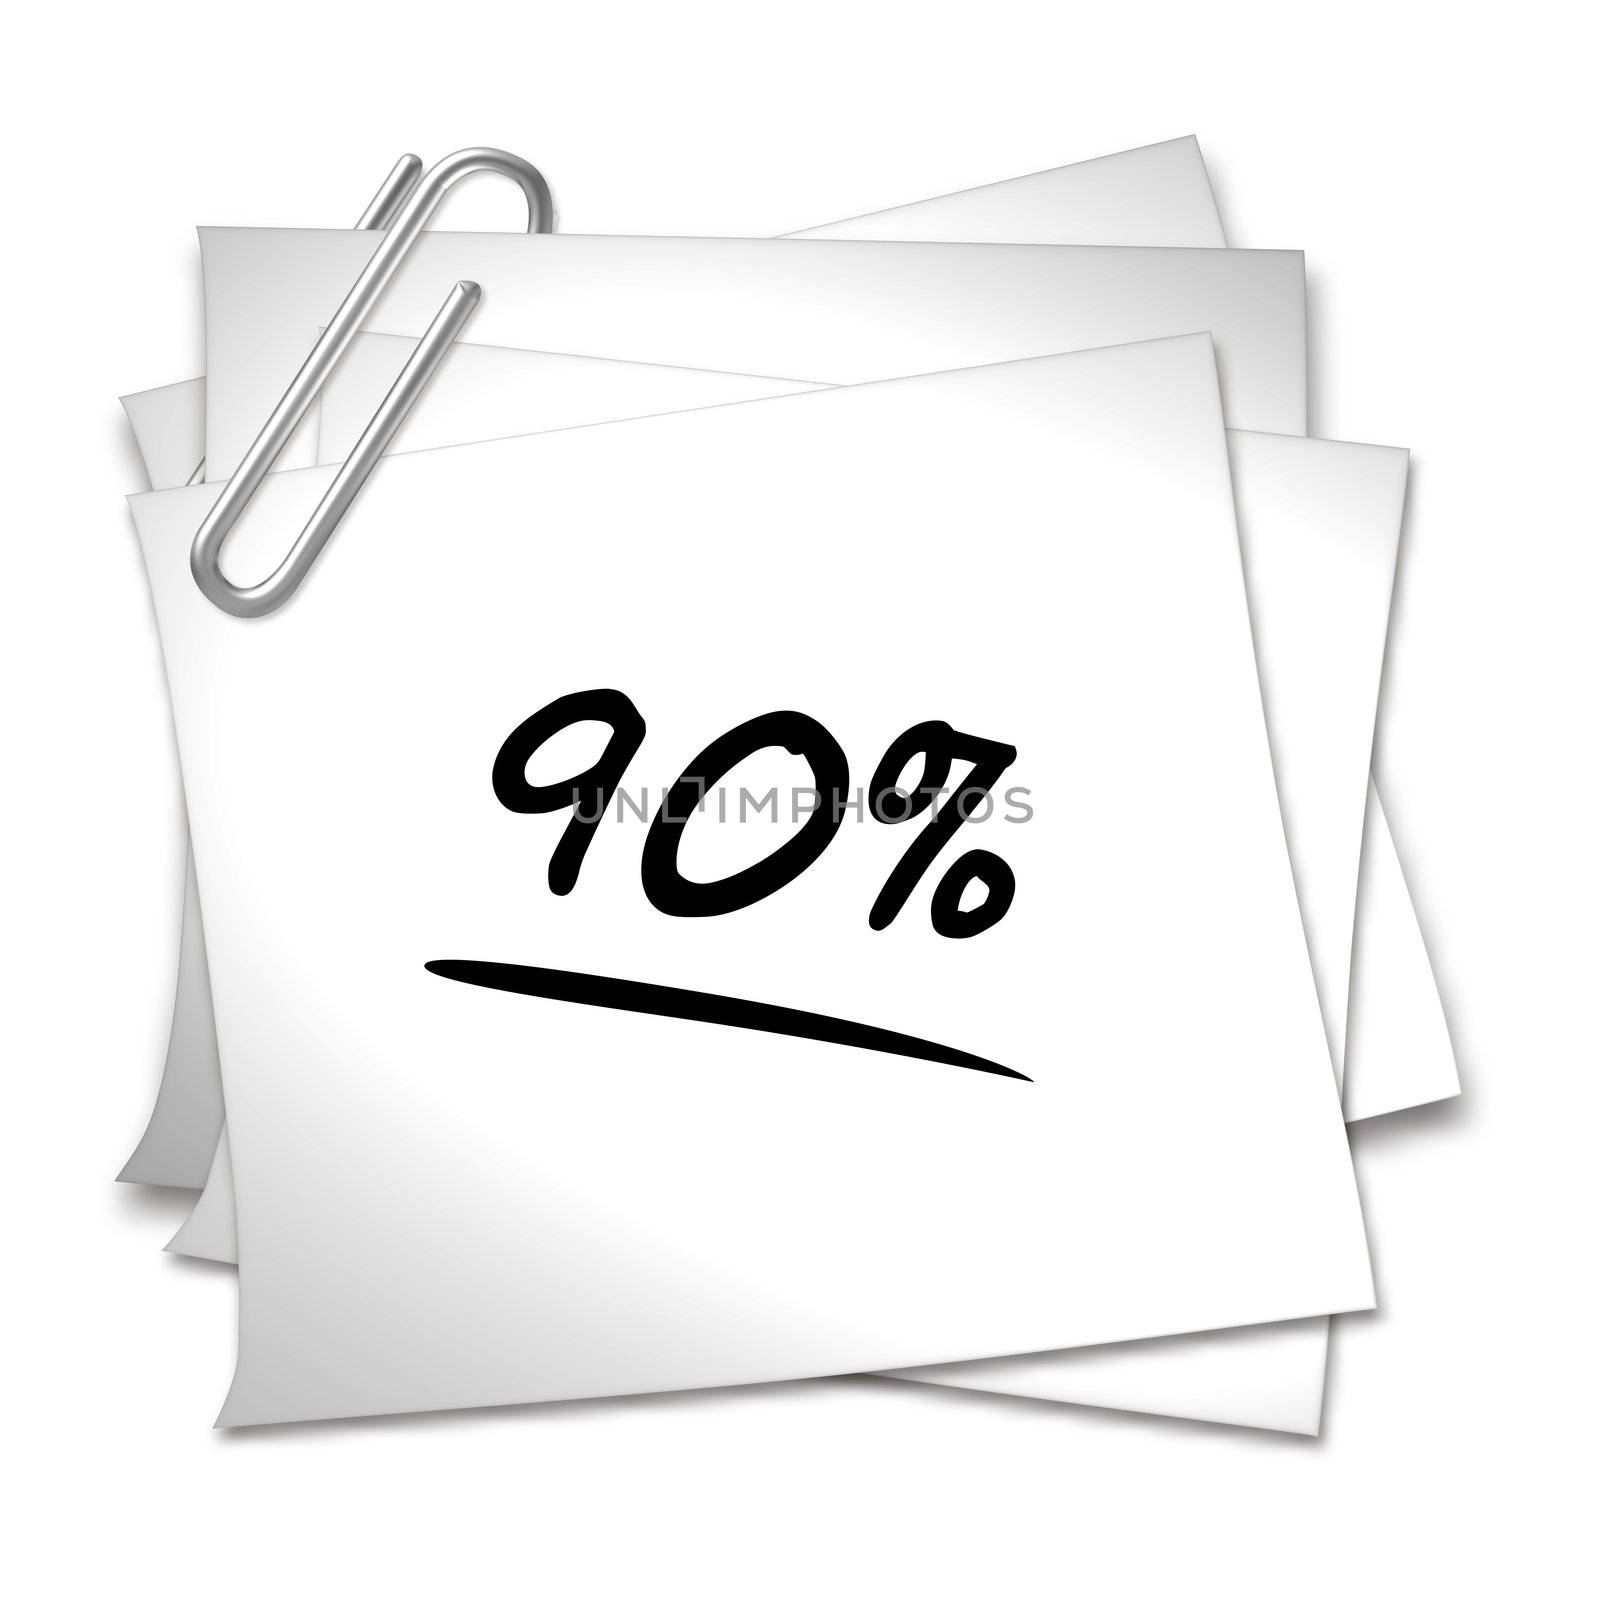 Memo with Paper Clip - 90 % by peromarketing